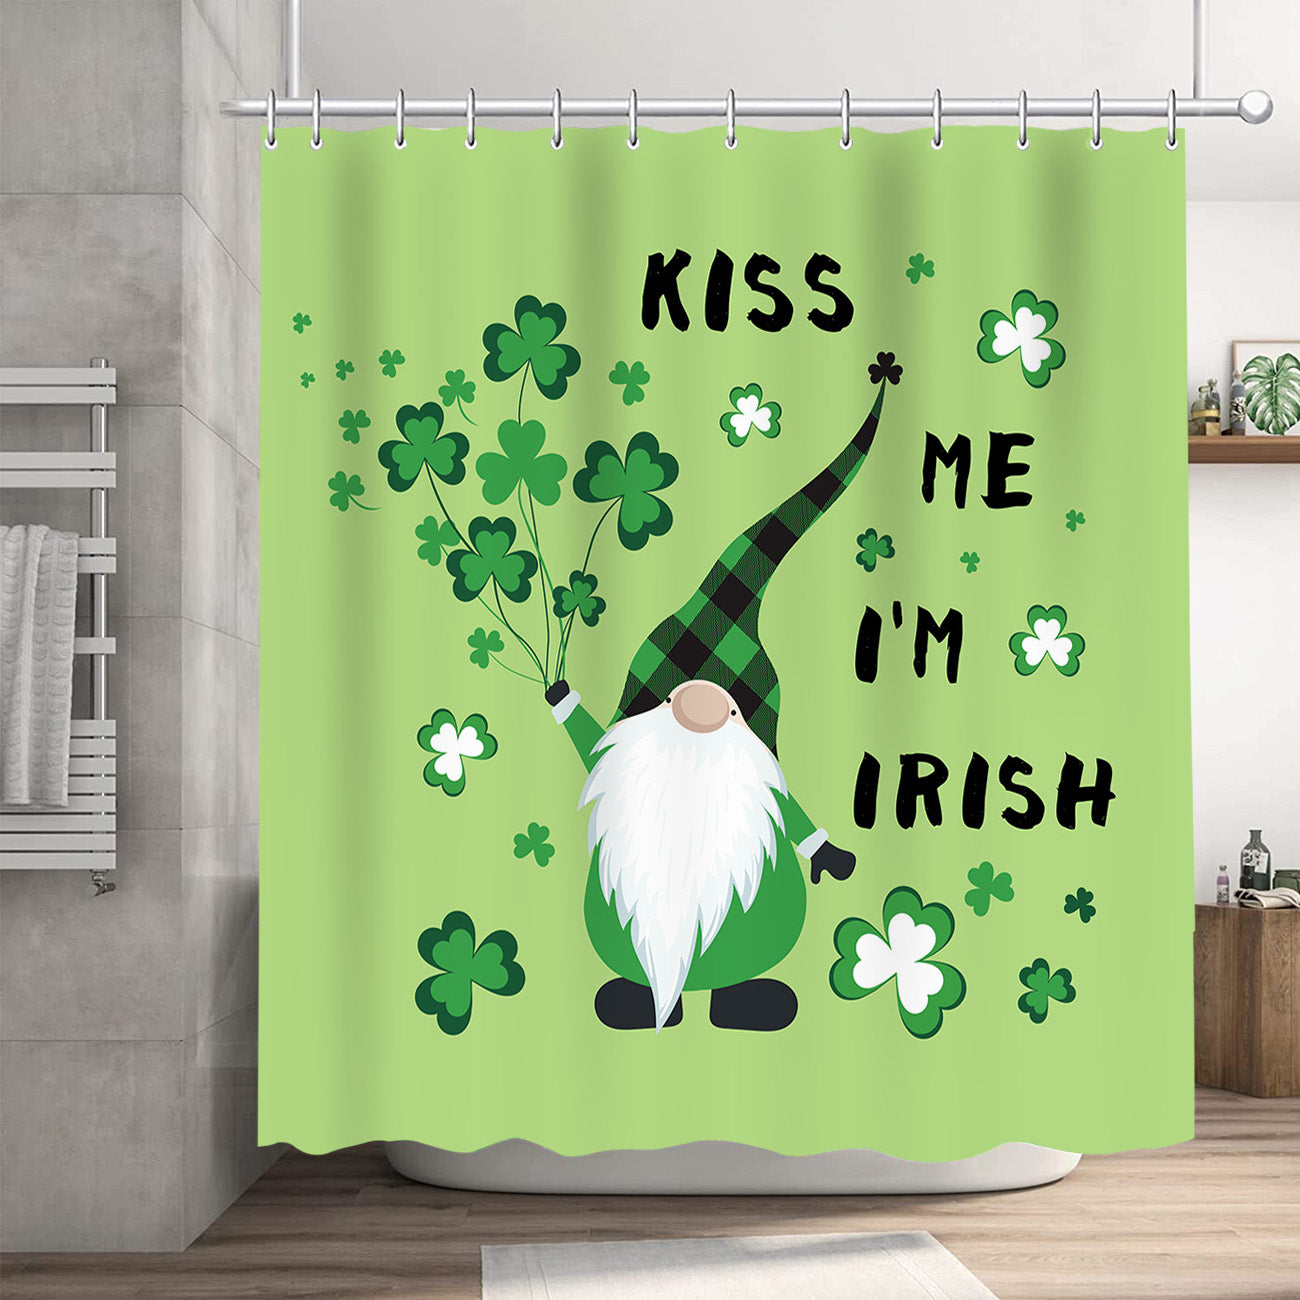 Long Hat Gnome - St. Patrick's Day Shower Curtain